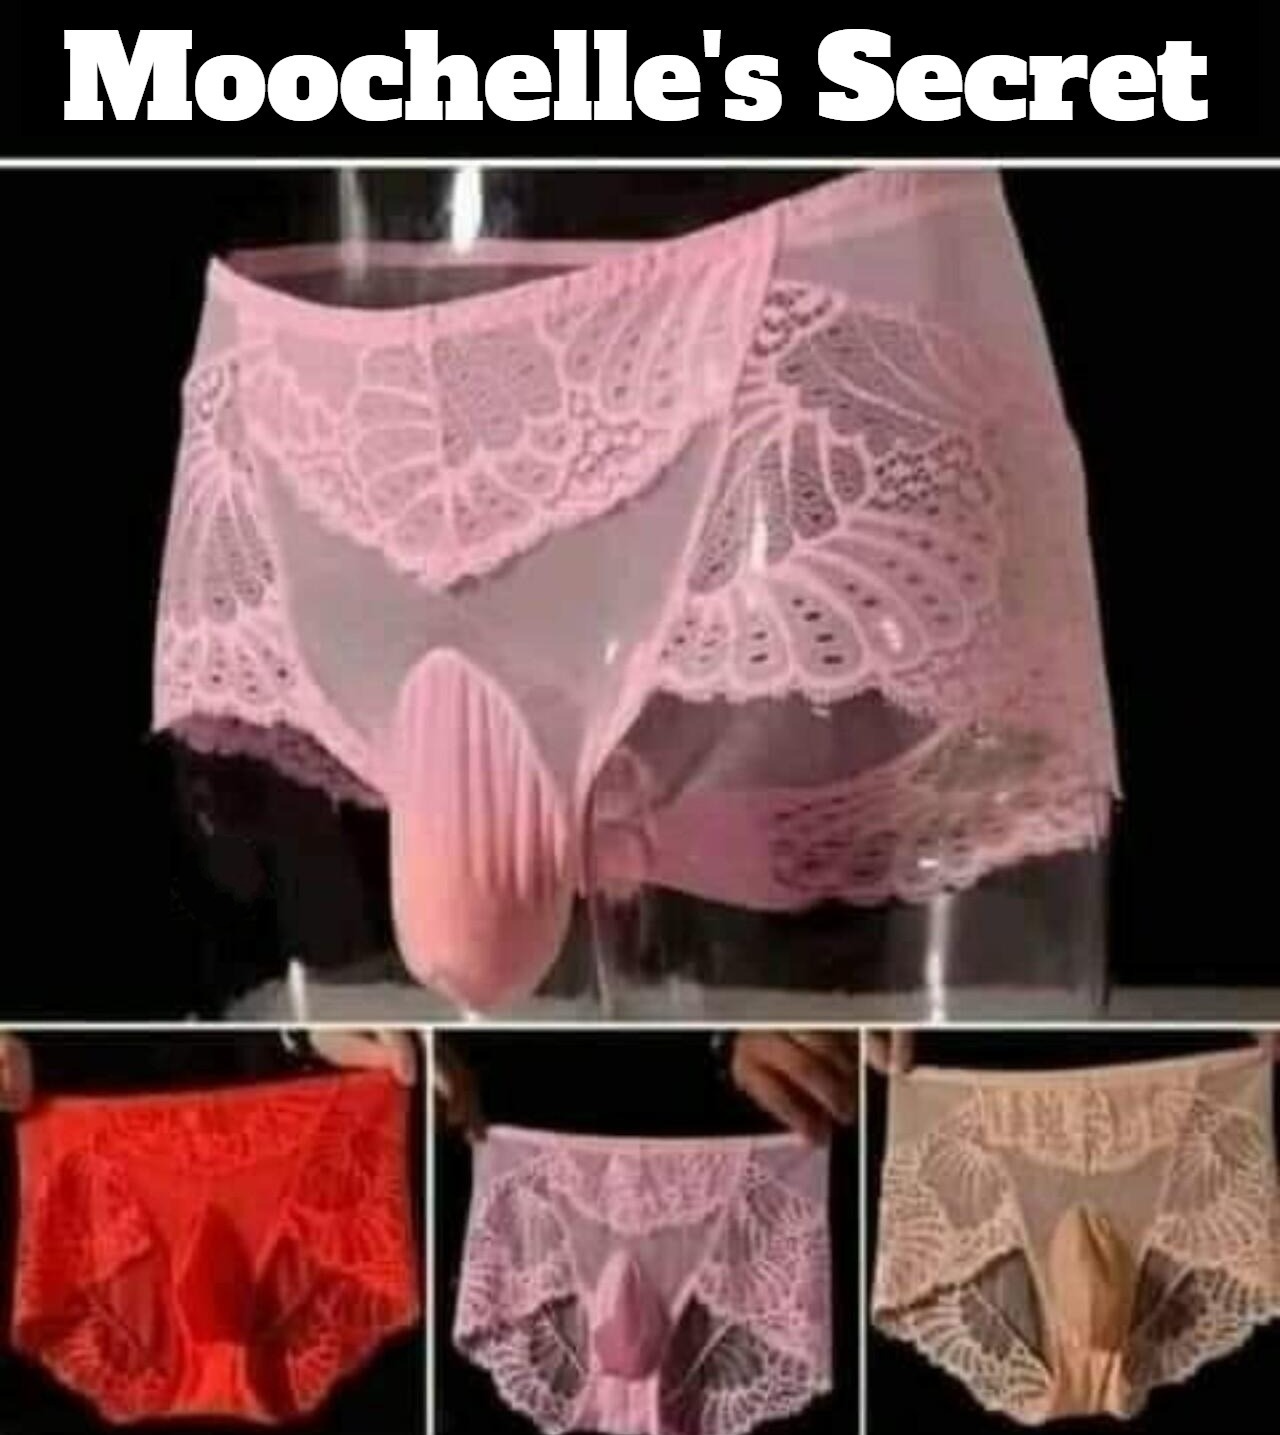 Moochelle's Secret | image tagged in moochelle obama,michelle obama,nutsack,lingerie,tranny laundry,tired of hearing about transgenders | made w/ Imgflip meme maker